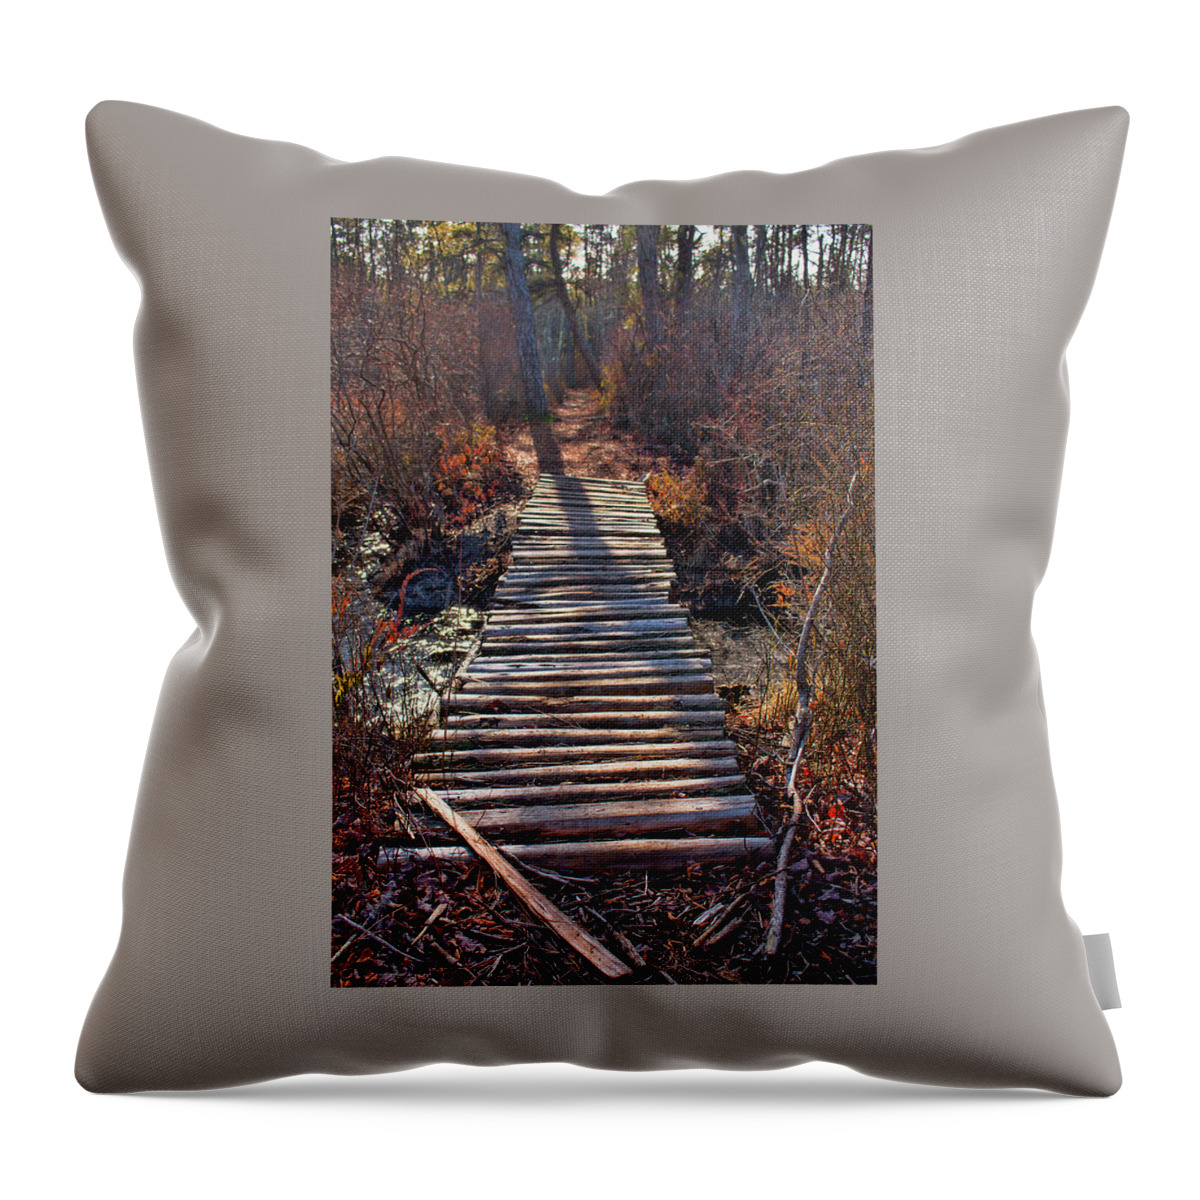 Nj Throw Pillow featuring the photograph The Path Less Traveled by Kristia Adams